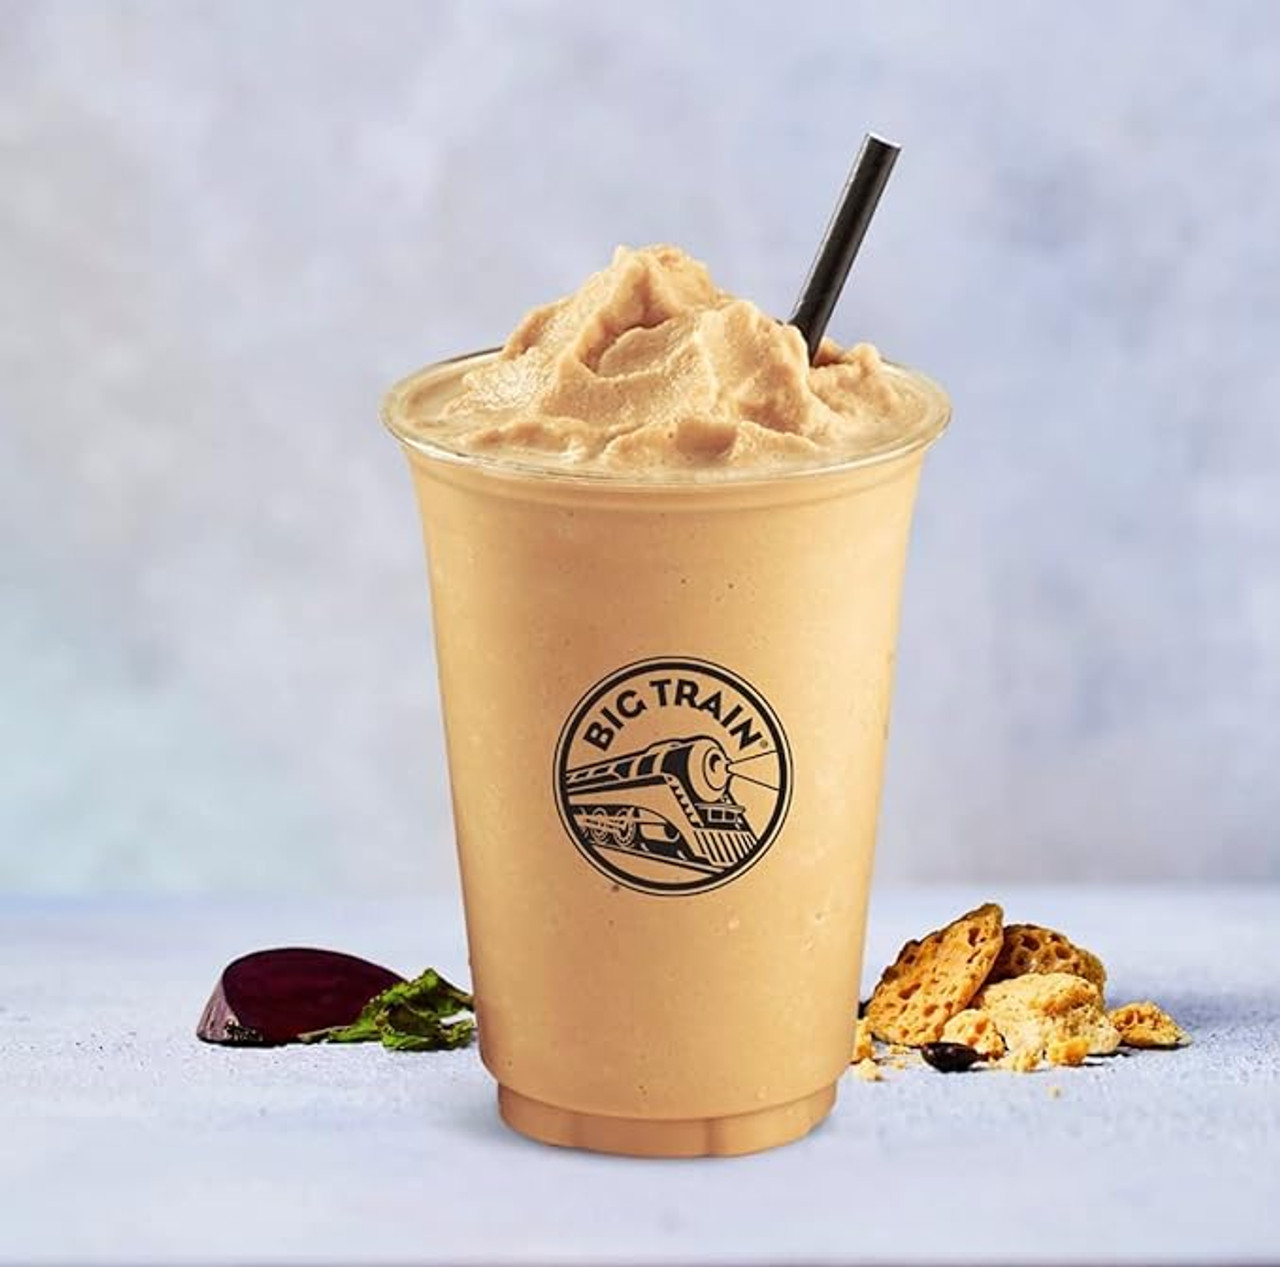 Big Train 3.5 lb. Caramel Latte Blended Ice Coffee Mix-Chicken Pieces